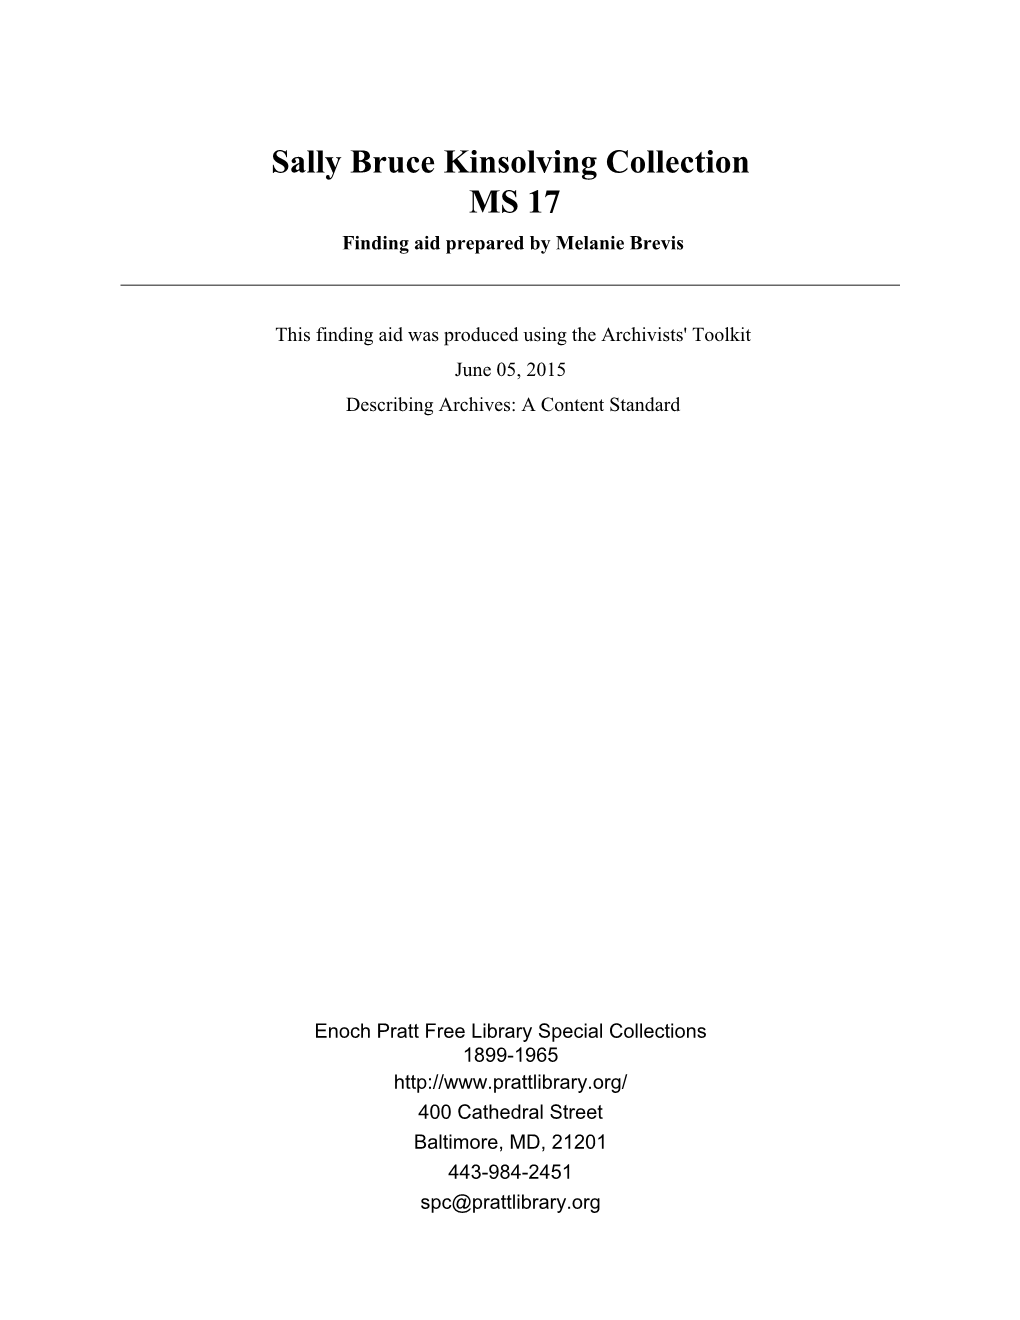 Sally Bruce Kinsolving Collection MS 17 Finding Aid Prepared by Melanie Brevis